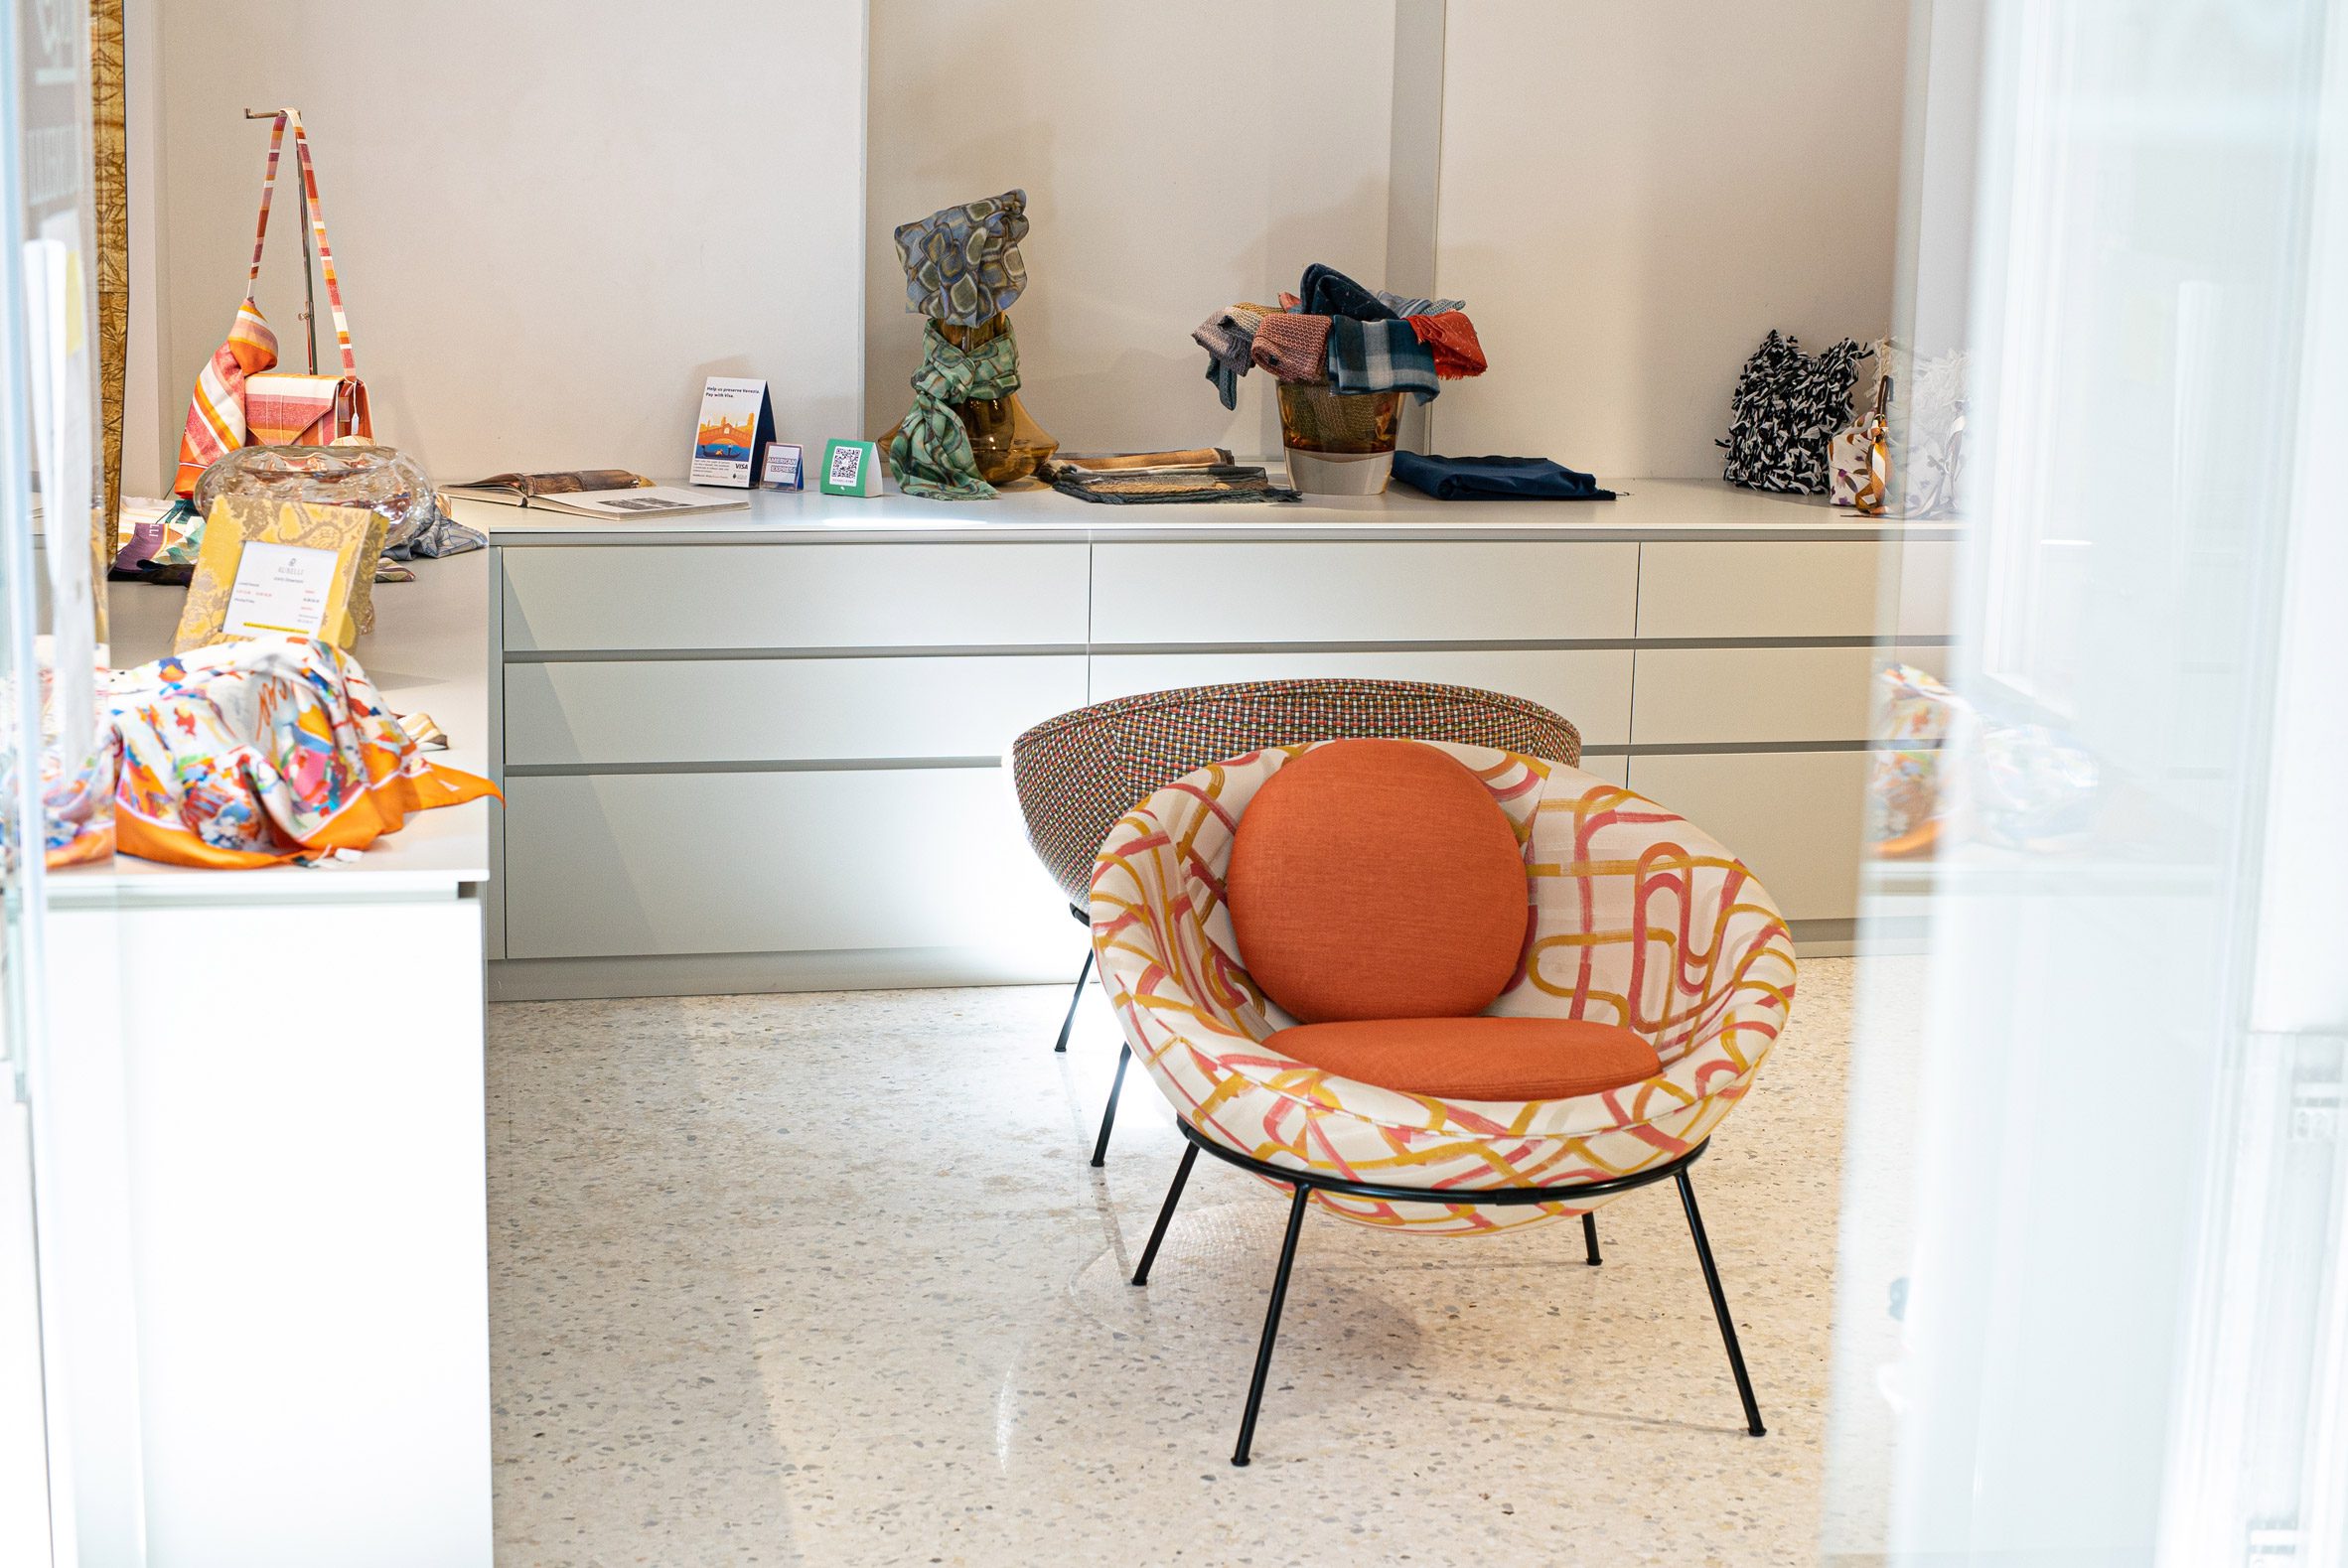 Orange Bardi's Bowl Chairs in a white interior with surrounding cabinetry and home accessories